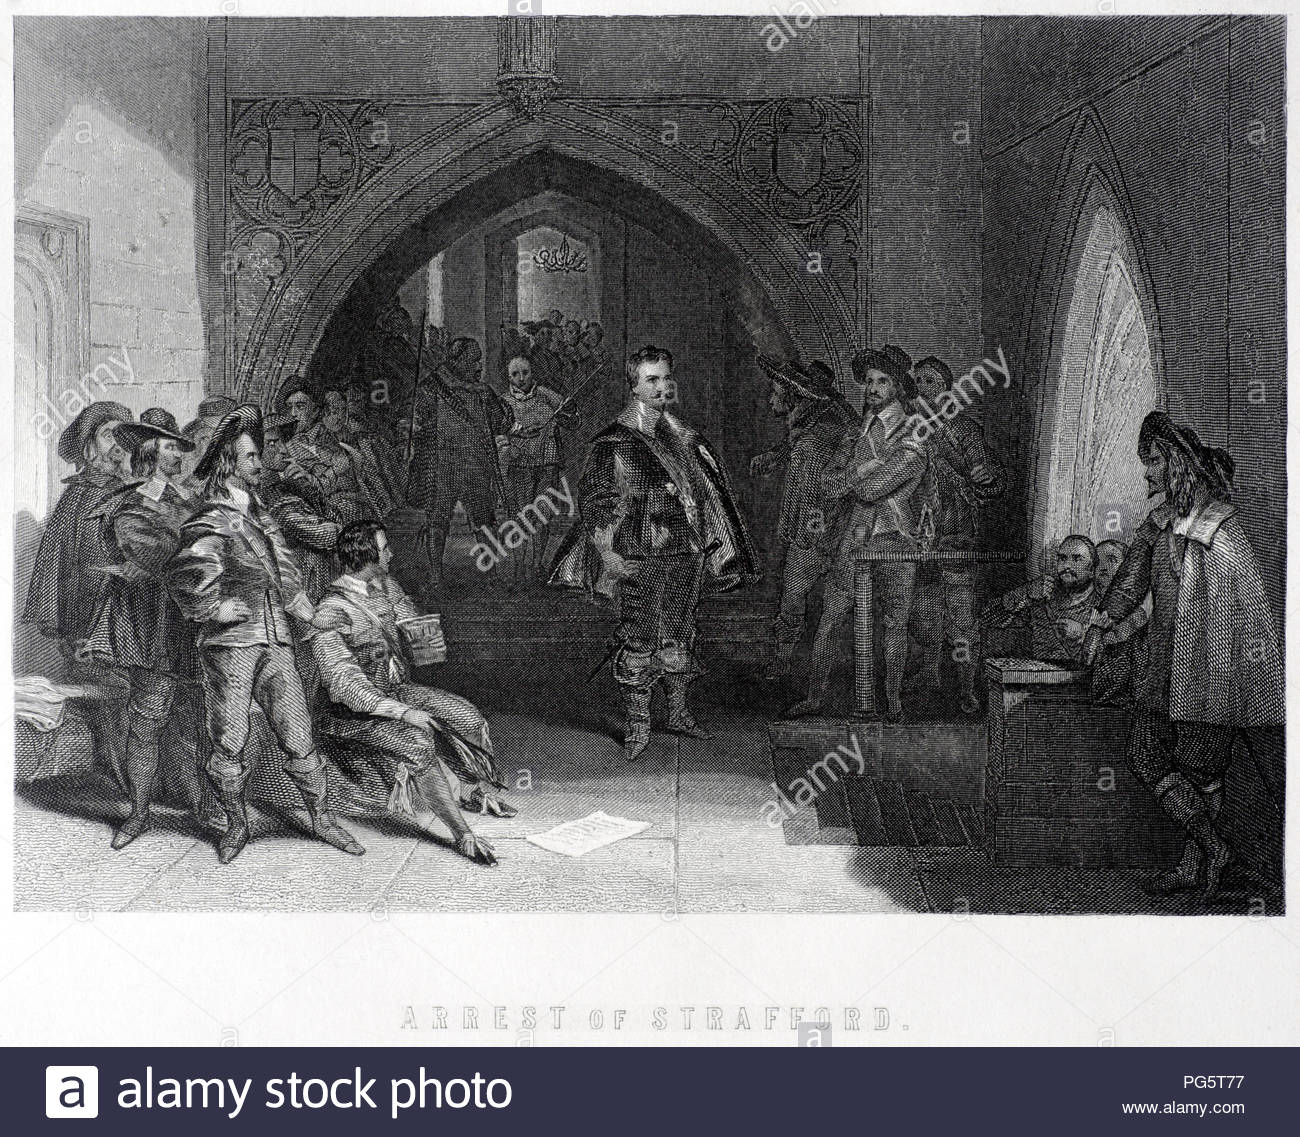 The arrest in 1640 of Thomas Wentworth, 1st Earl of Strafford, illustration from the 1800s Stock Photo